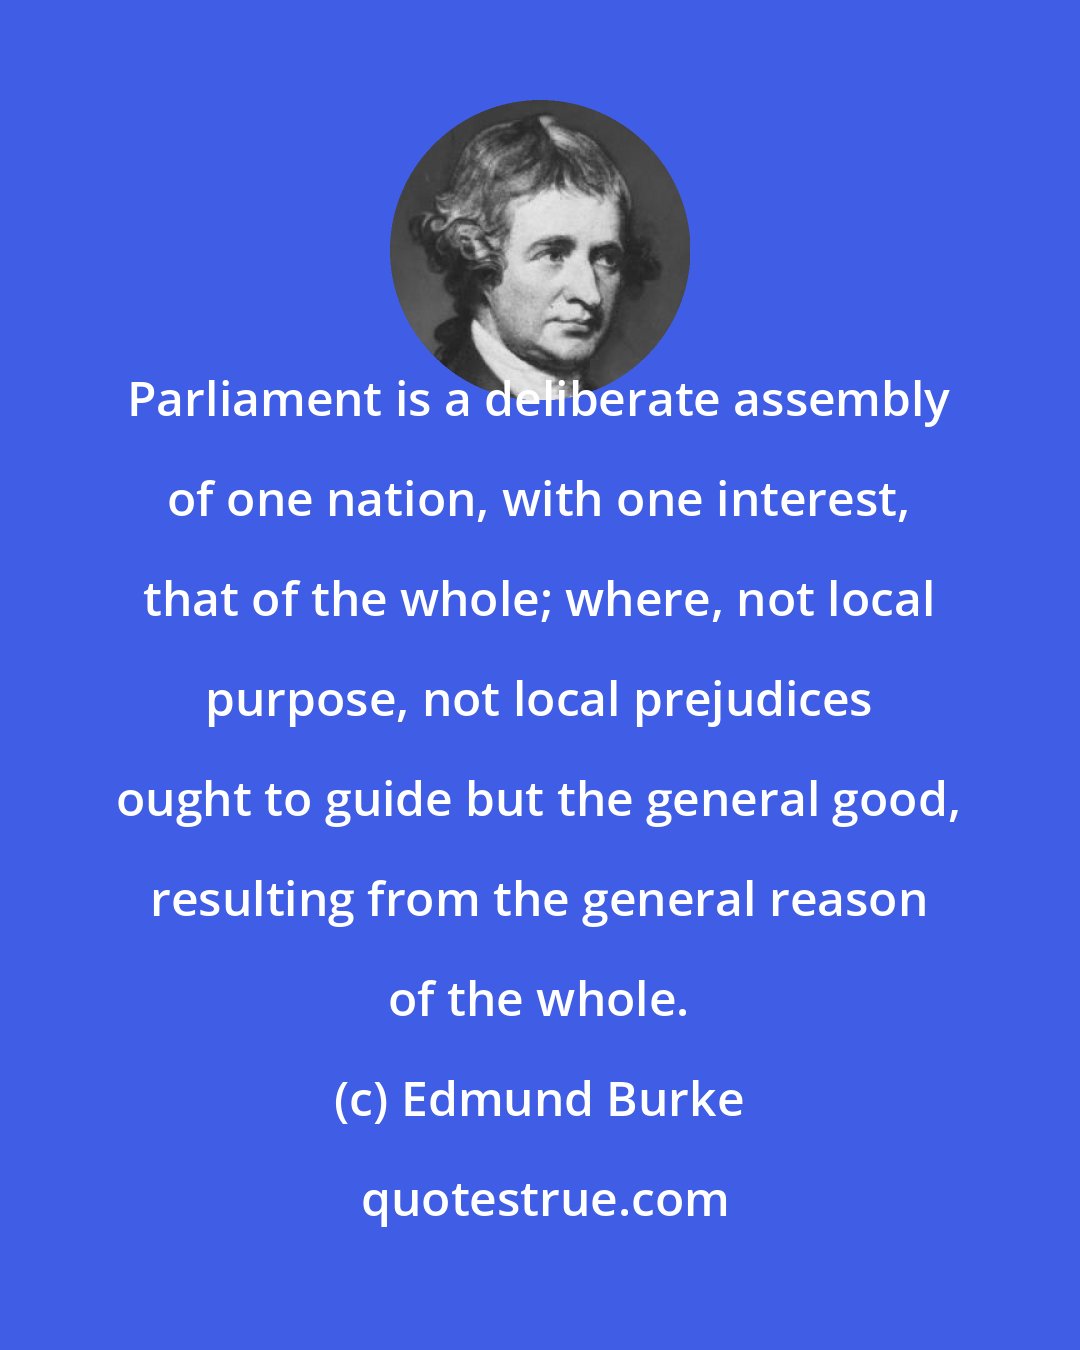 Edmund Burke: Parliament is a deliberate assembly of one nation, with one interest, that of the whole; where, not local purpose, not local prejudices ought to guide but the general good, resulting from the general reason of the whole.